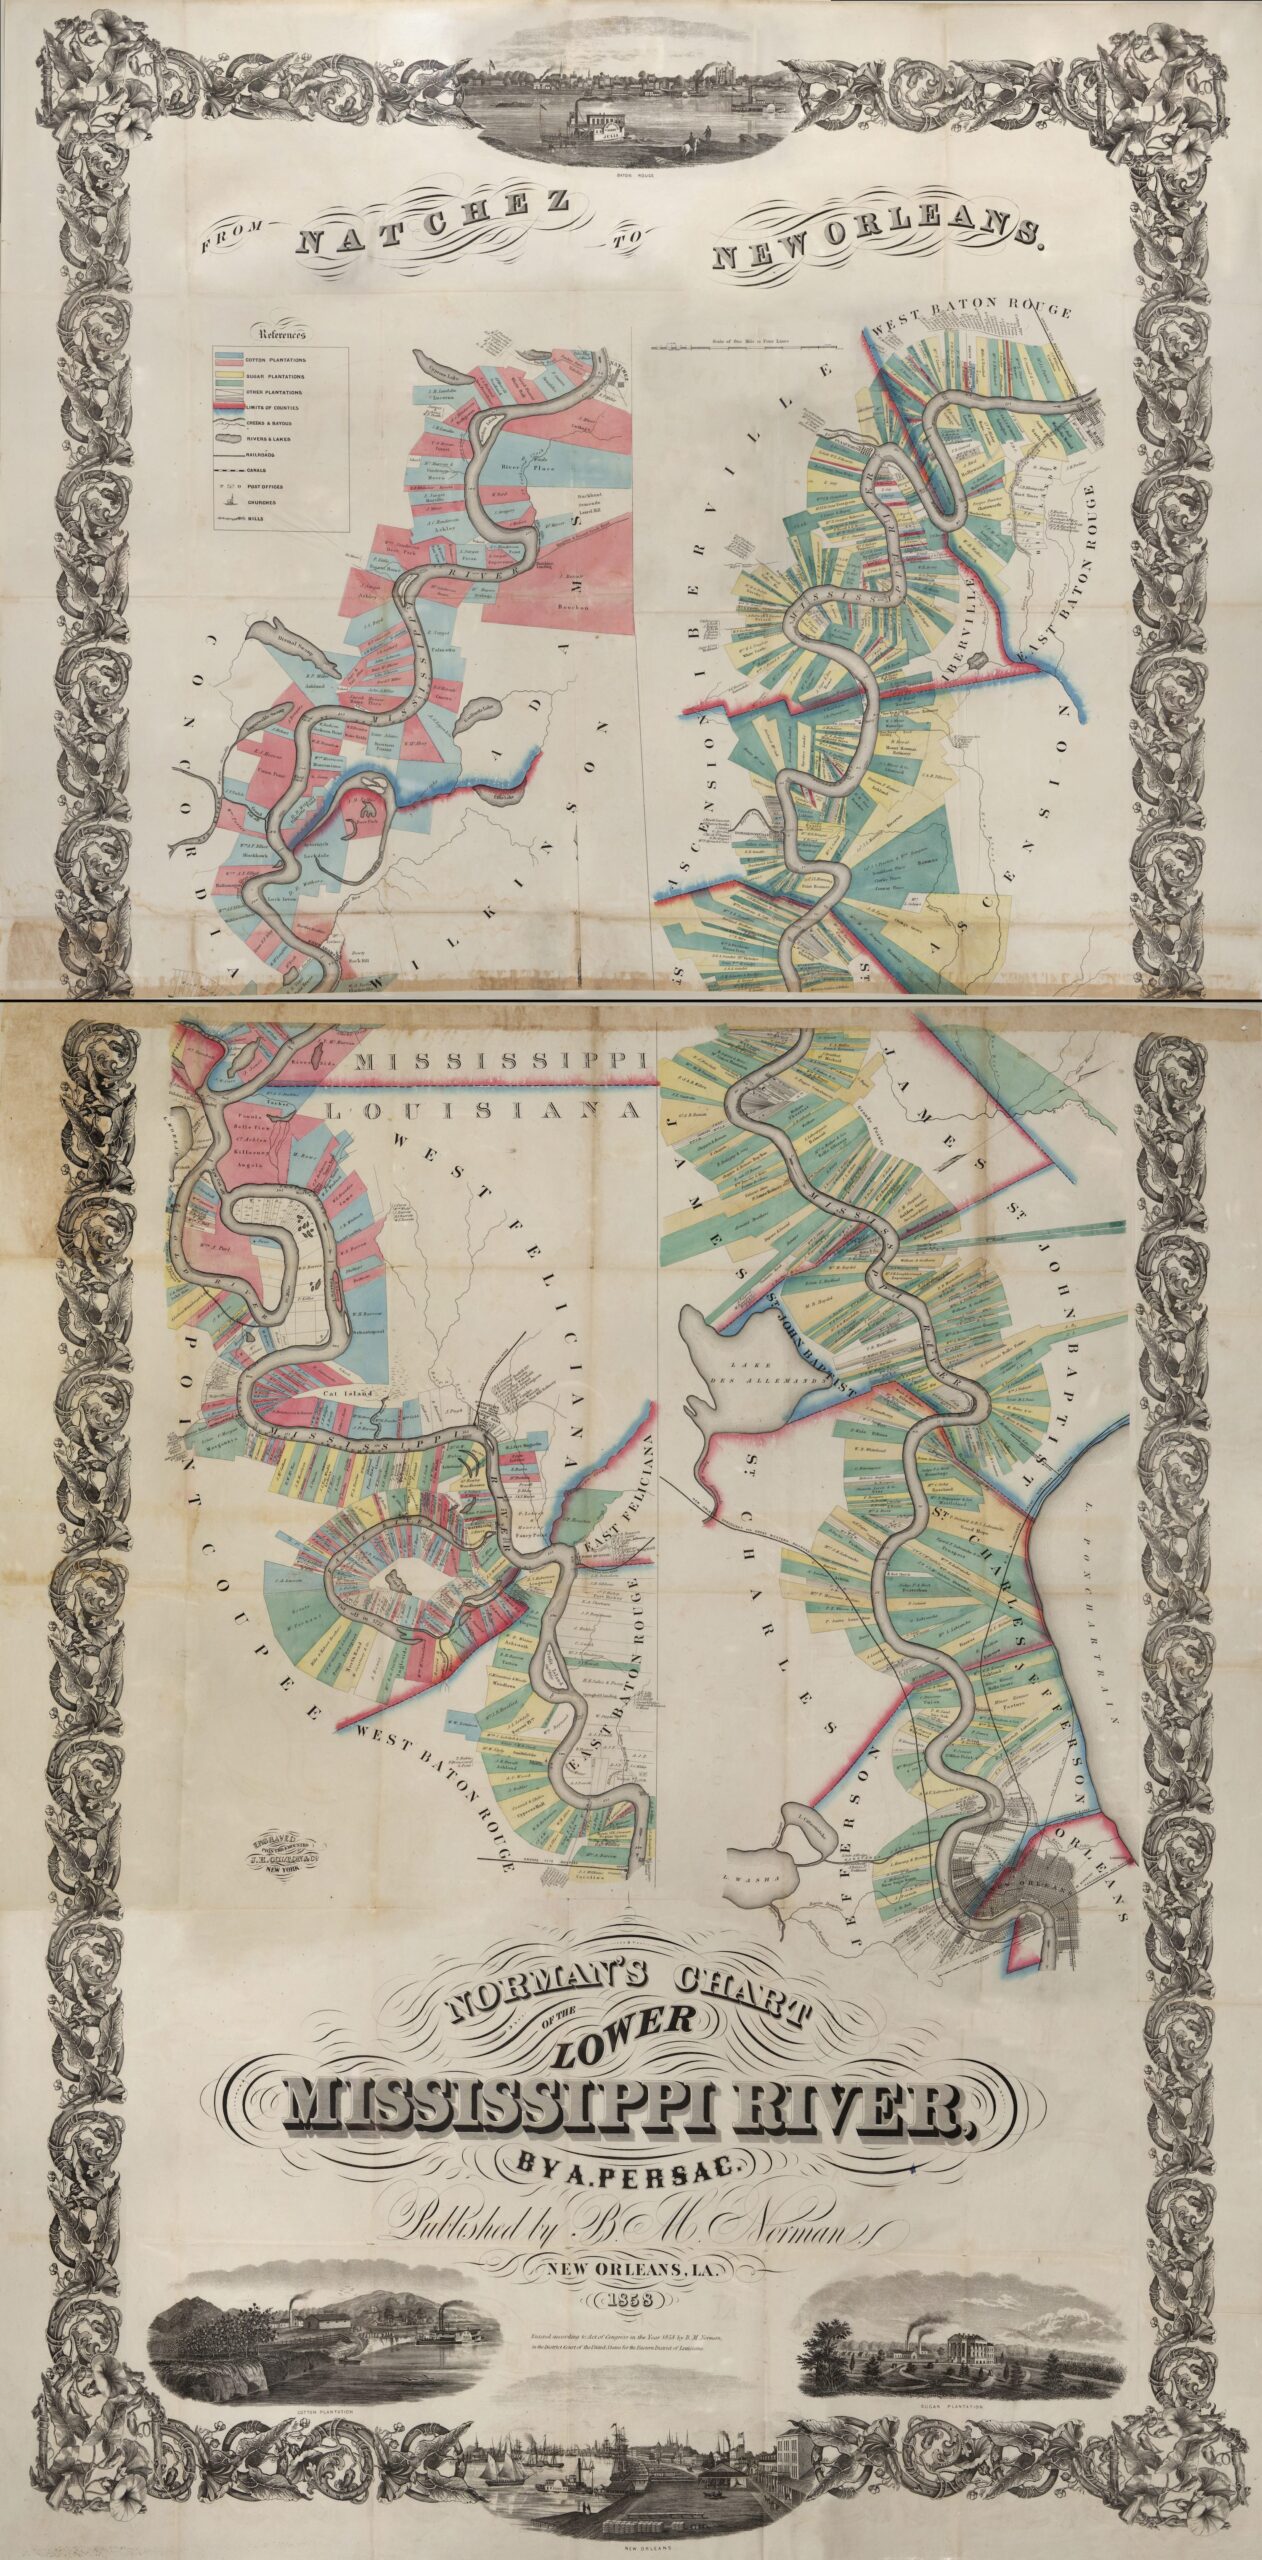 Vertical depiction of the lower Mississippi River with colored bands showing the uses of the land along the riverbanks.